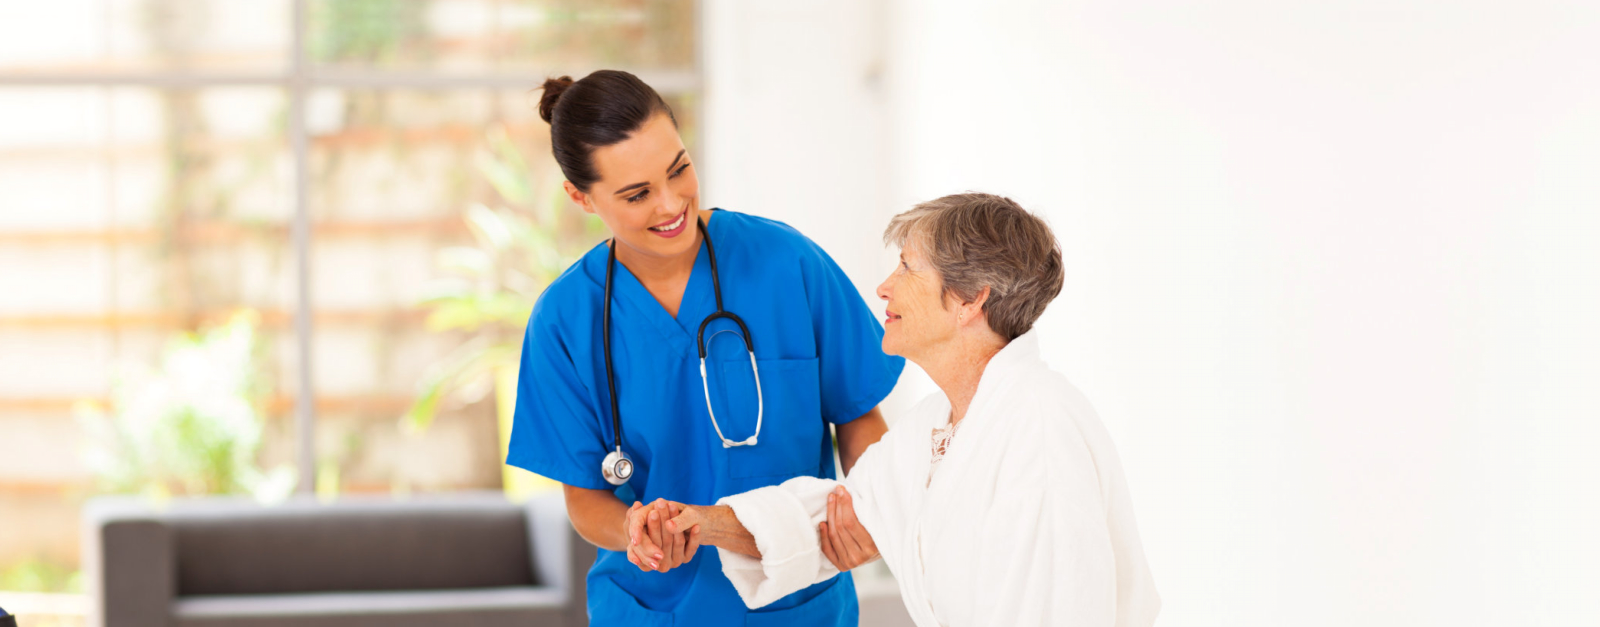 Things to consider before seeking care home services